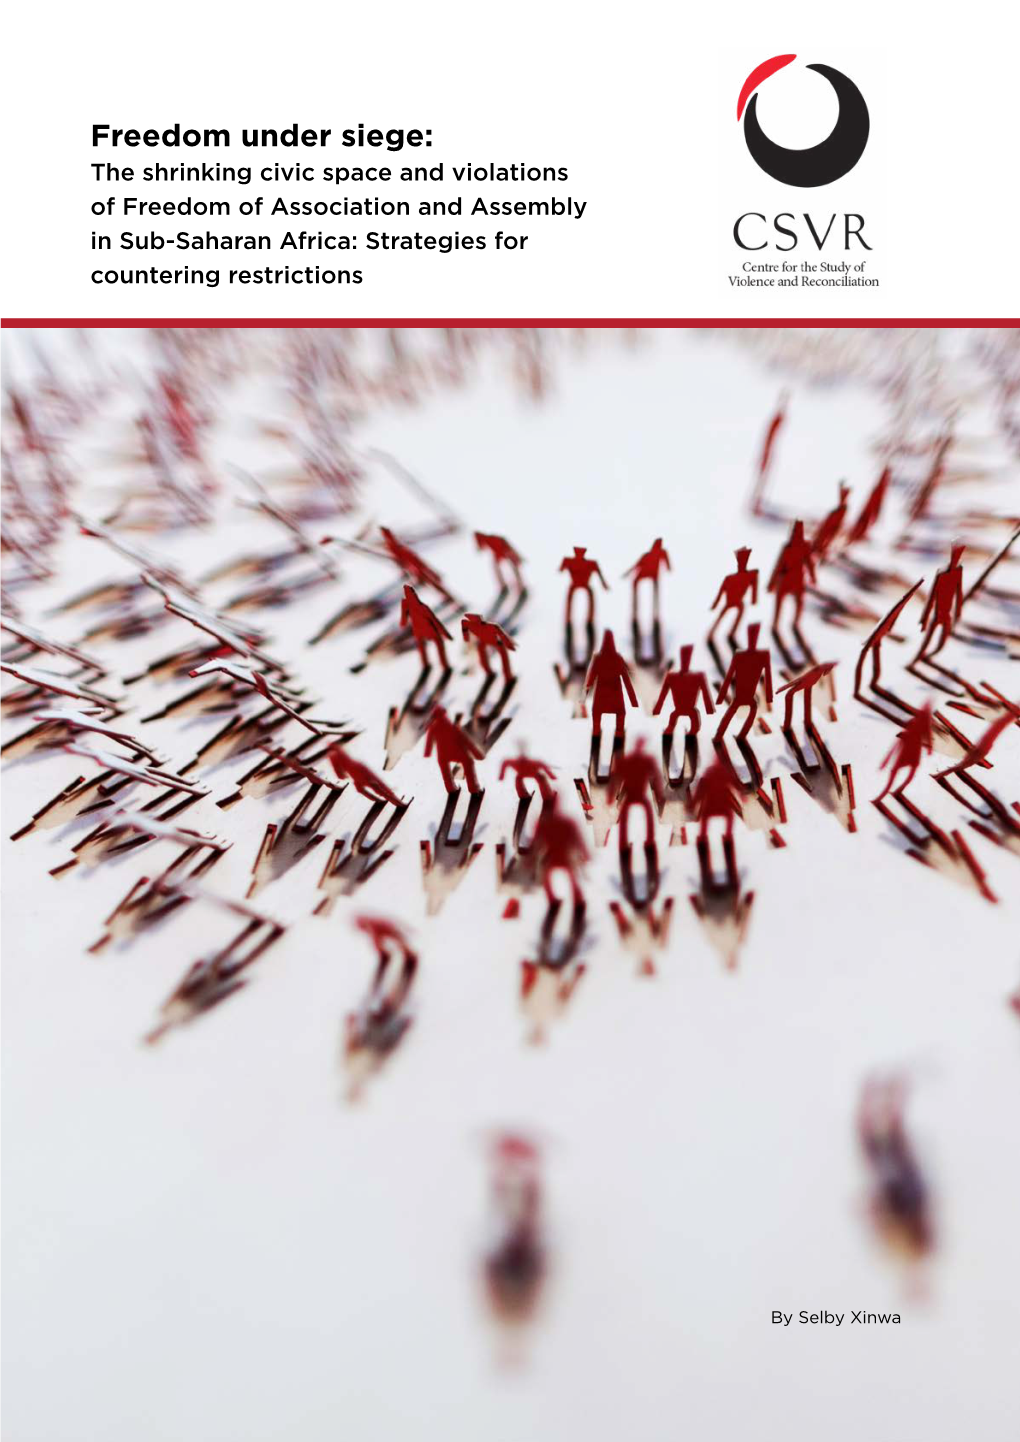 Freedom Under Siege: the Shrinking Civic Space and Violations of Freedom of Association and Assembly in Sub-Saharan Africa: Strategies for Countering Restrictions